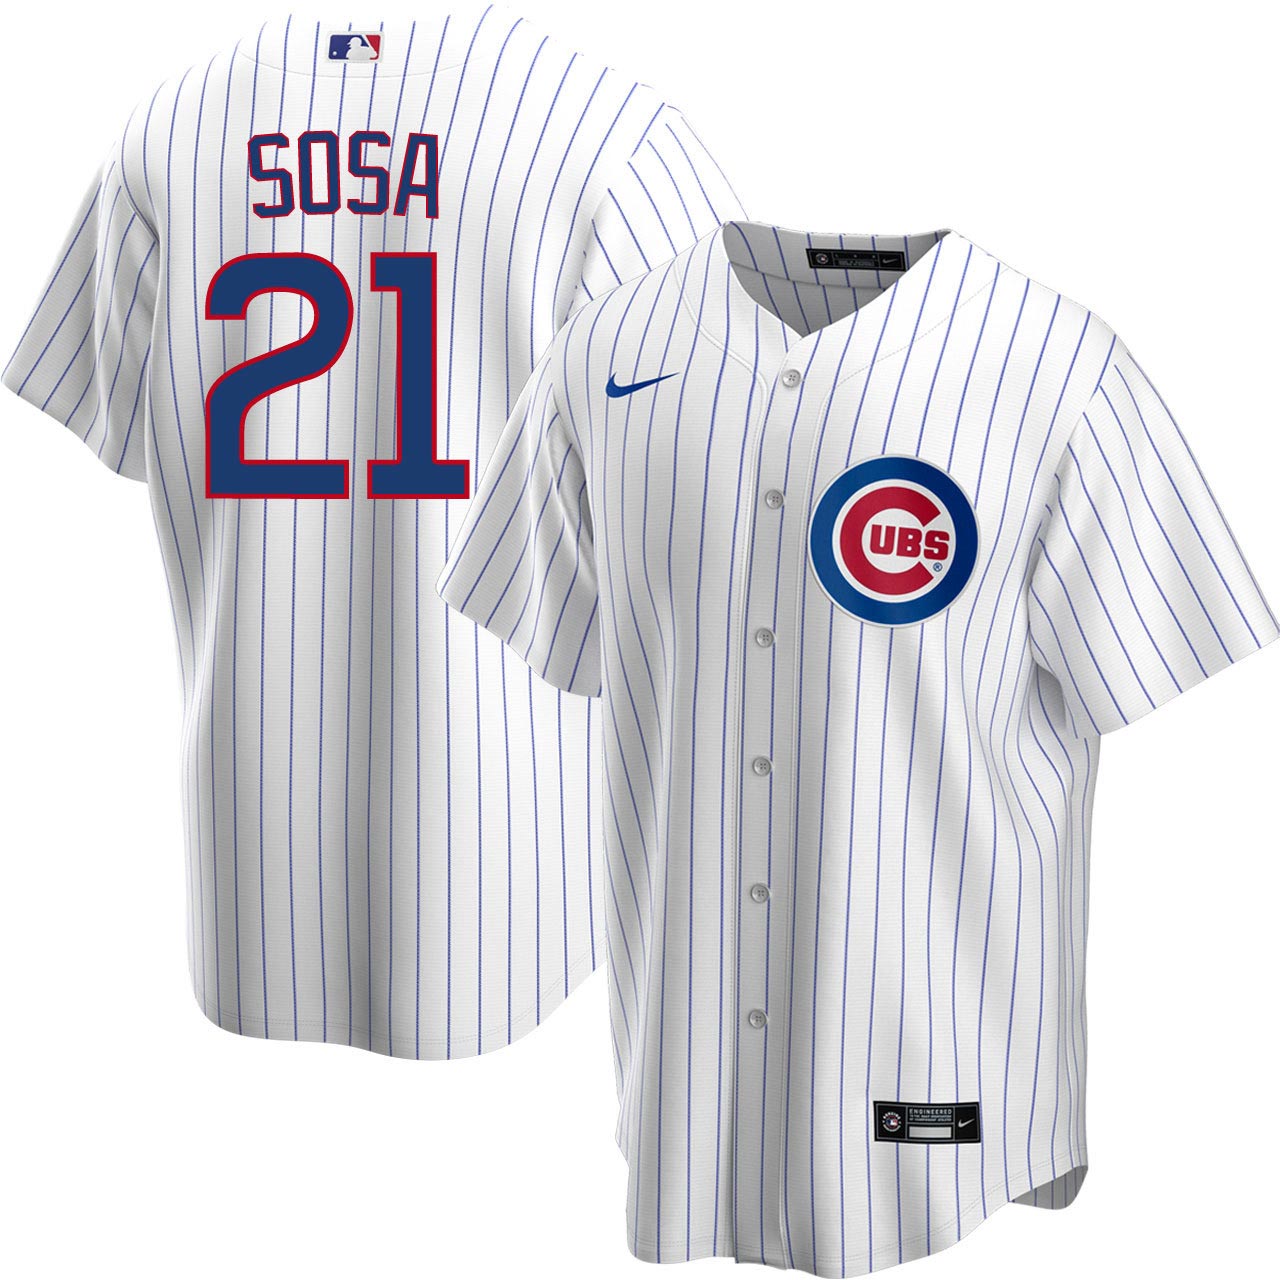 Chicago Cubs Sammy Sosa Nike Road Replica Jersey With Authentic